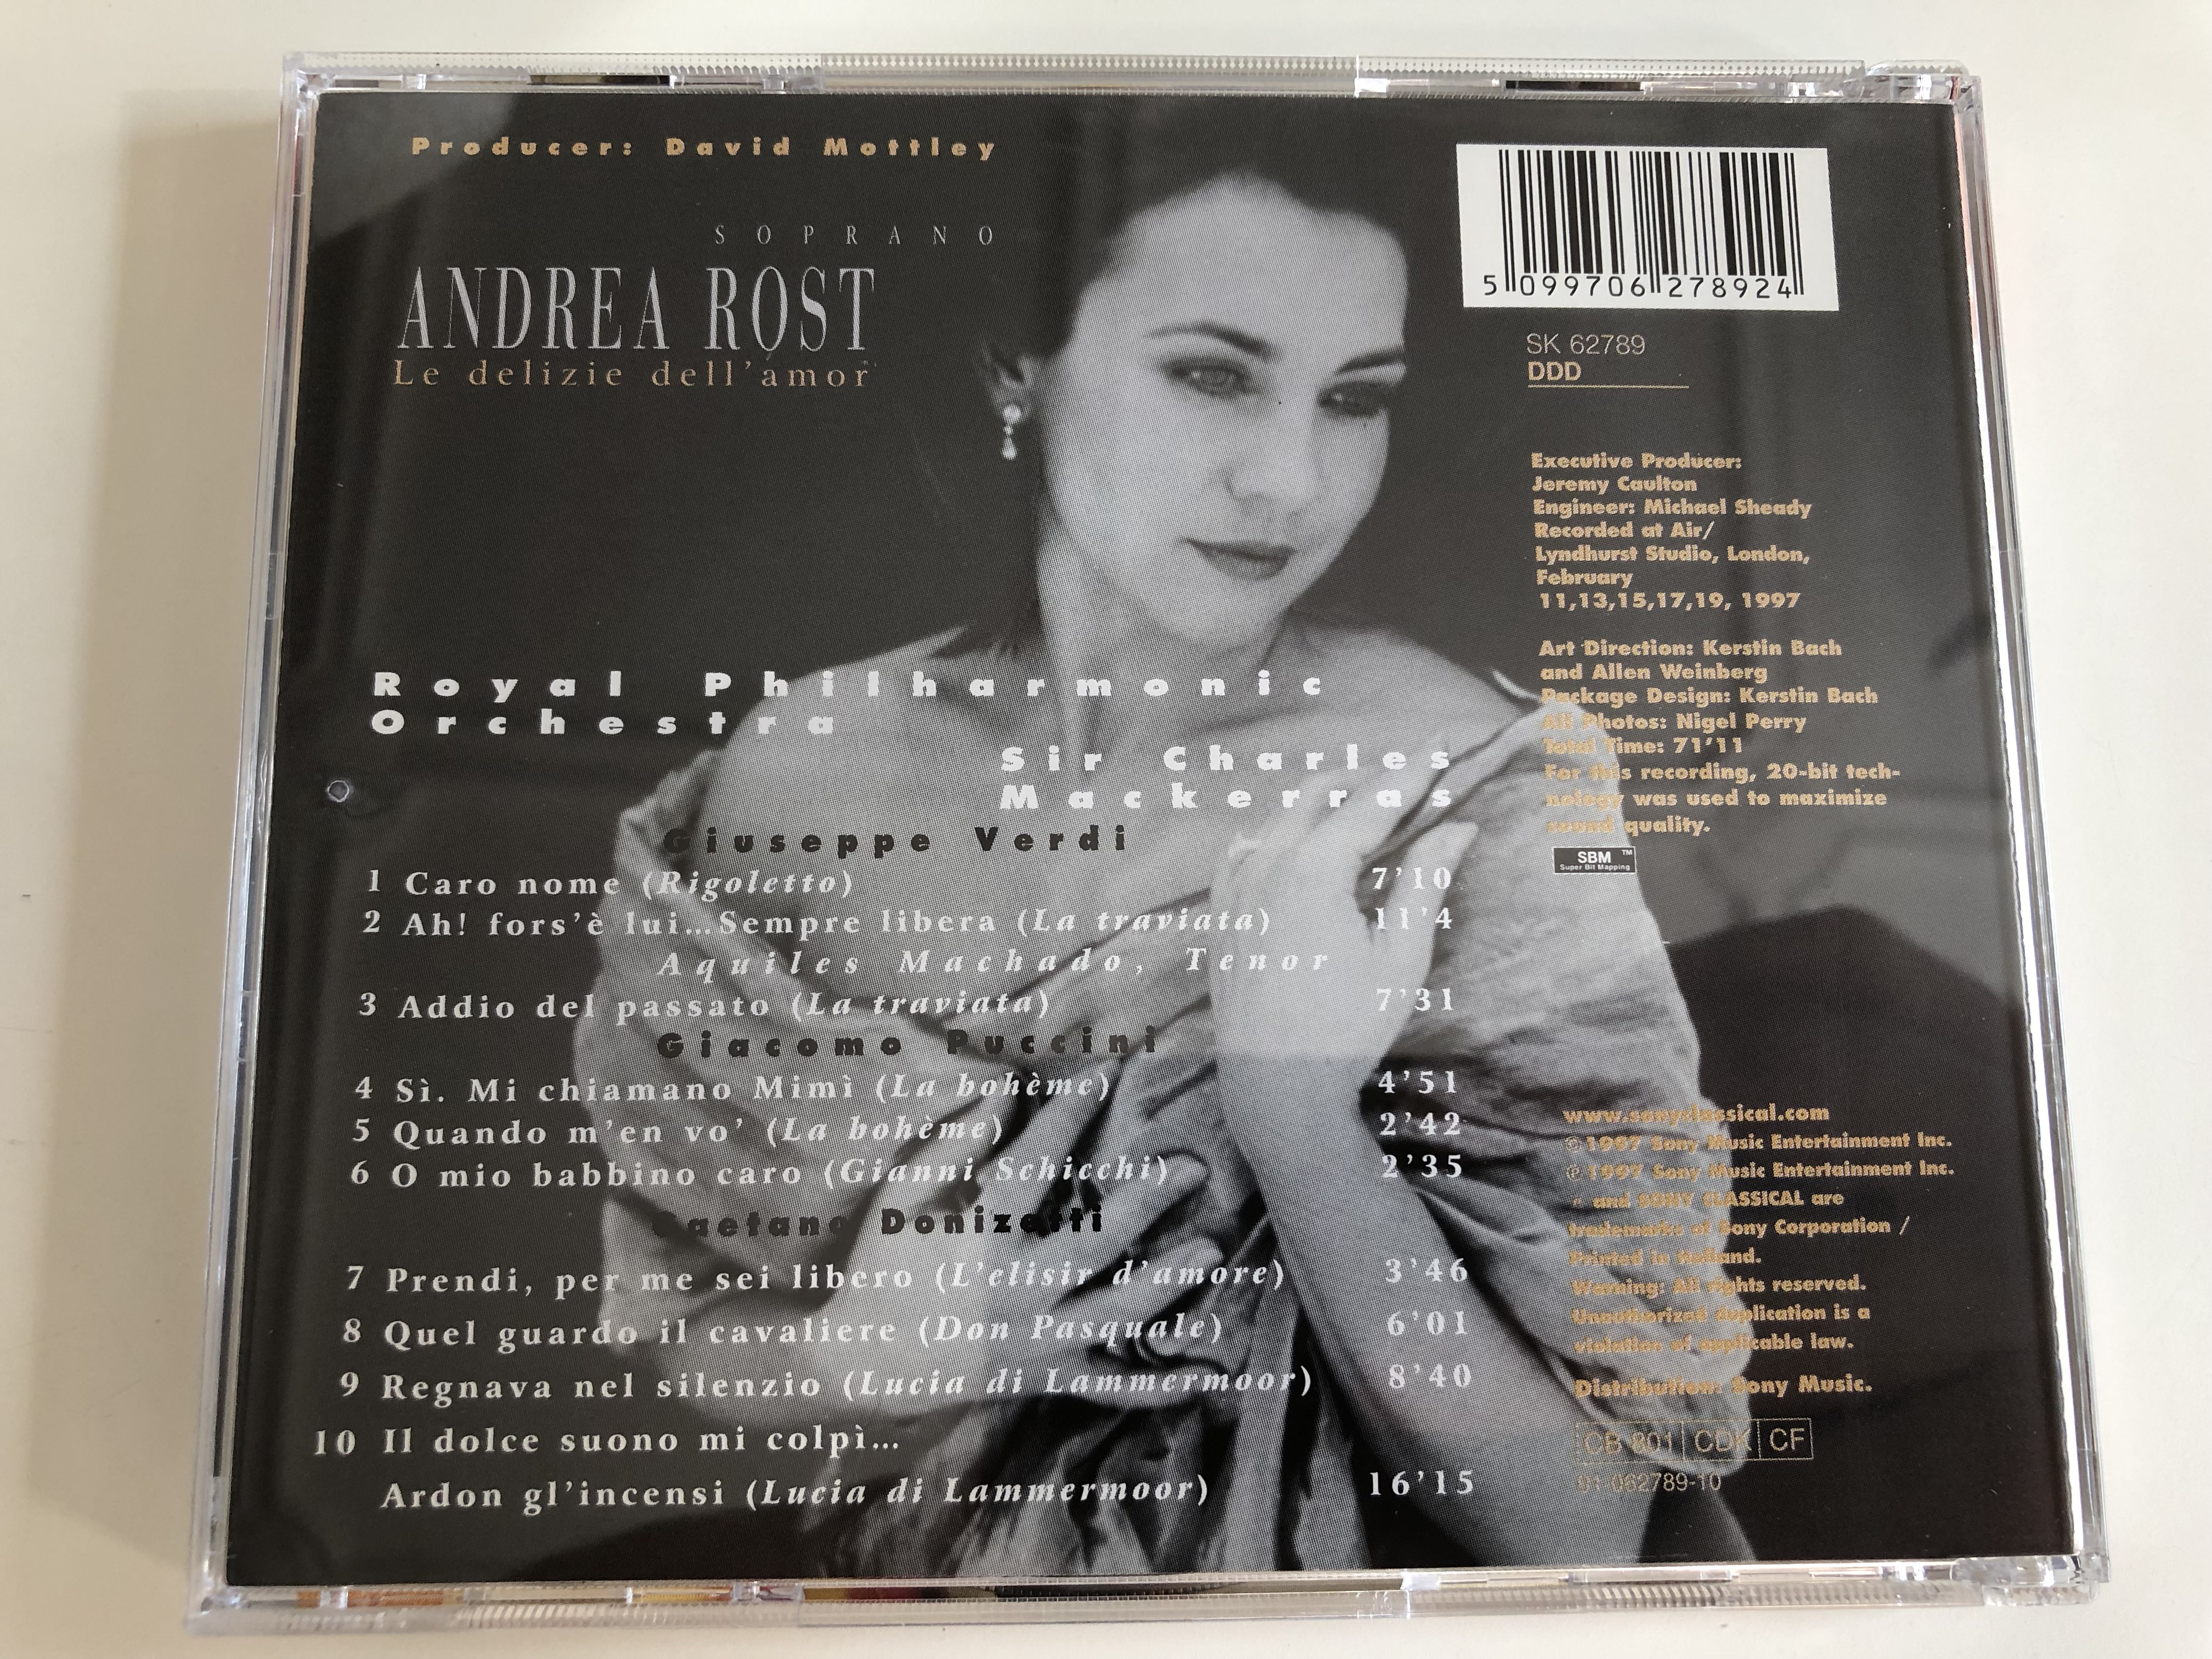 andrea-rost-le-delizie-dell-amor-royal-philharmonic-orchestra-sir-charles-mackerras-sony-classical-audio-cd-1997-sk-62789-9-.jpg